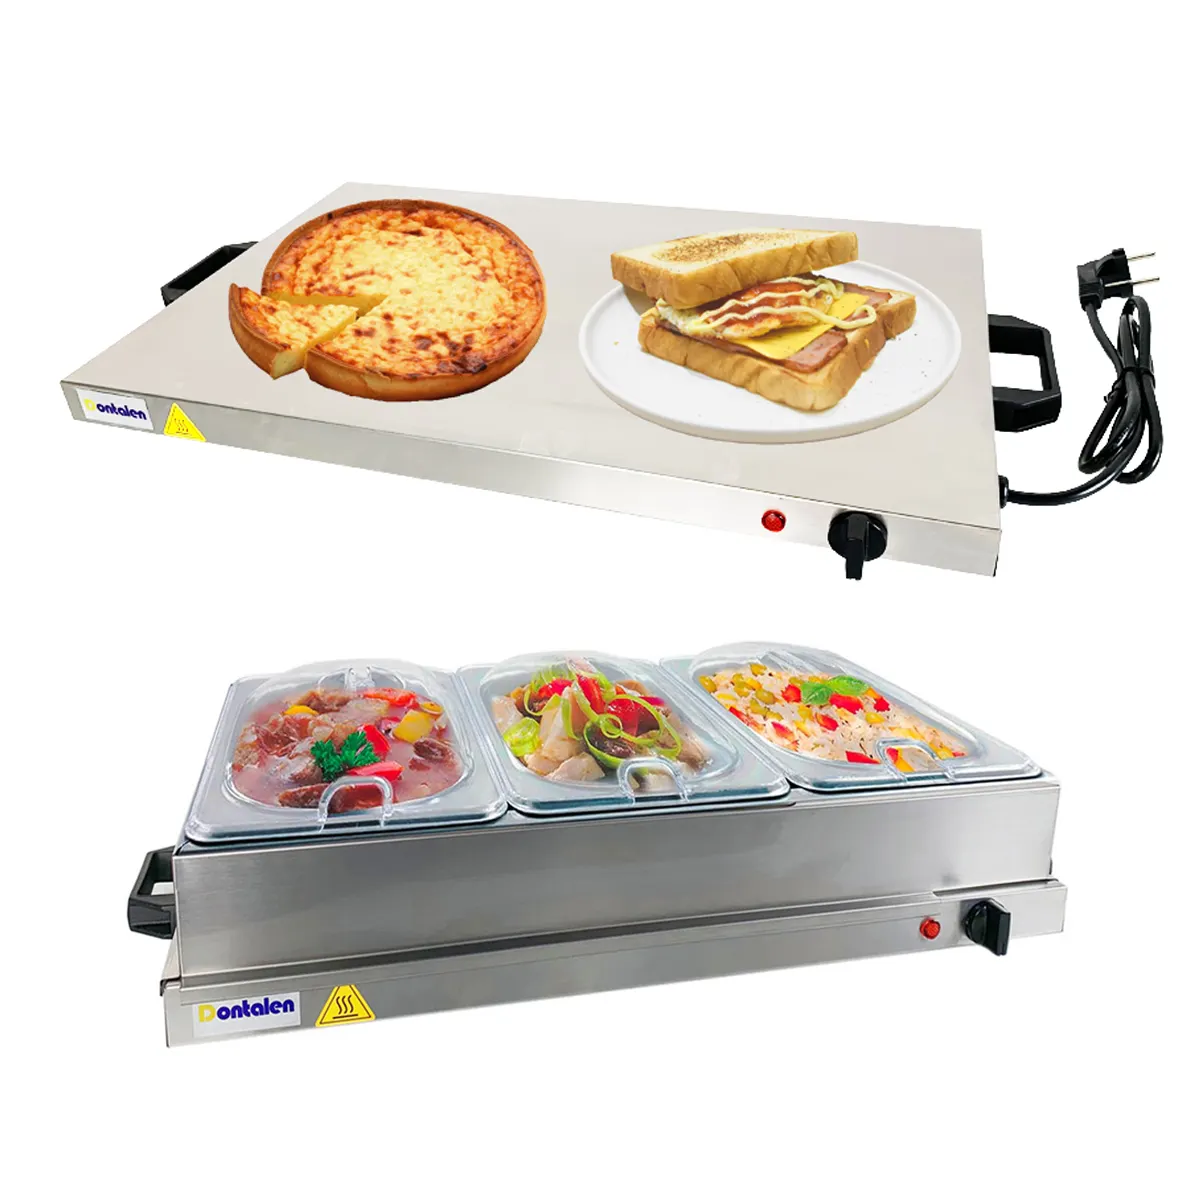 Dontalen Stainless Steel Buffet Food Insulation Board Suitable For Home Restaurant Self-Service Mini Electric Food Heater